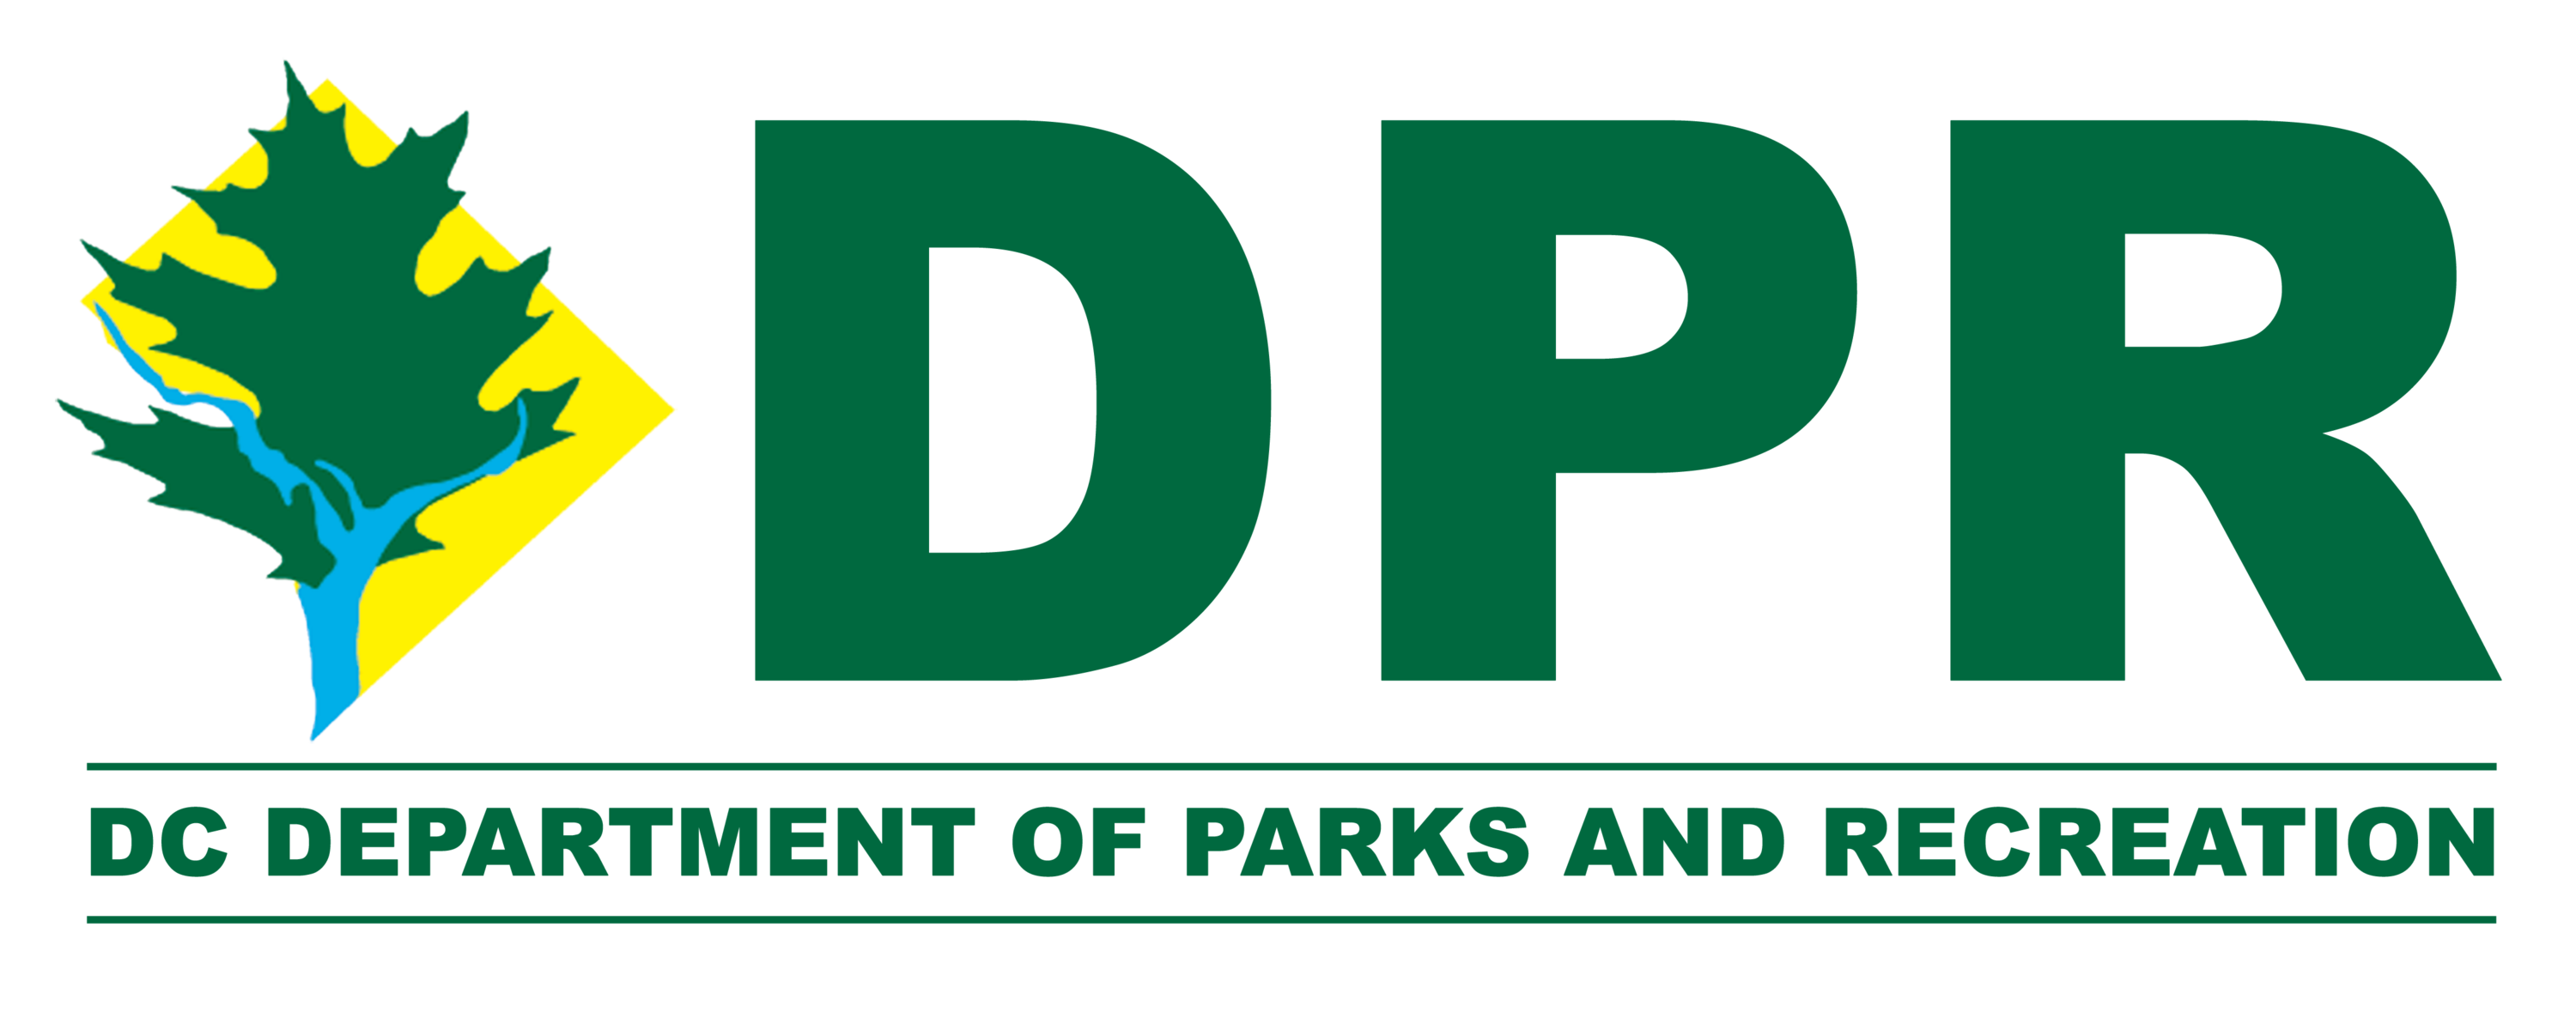 Department of Parks and Recreation logo